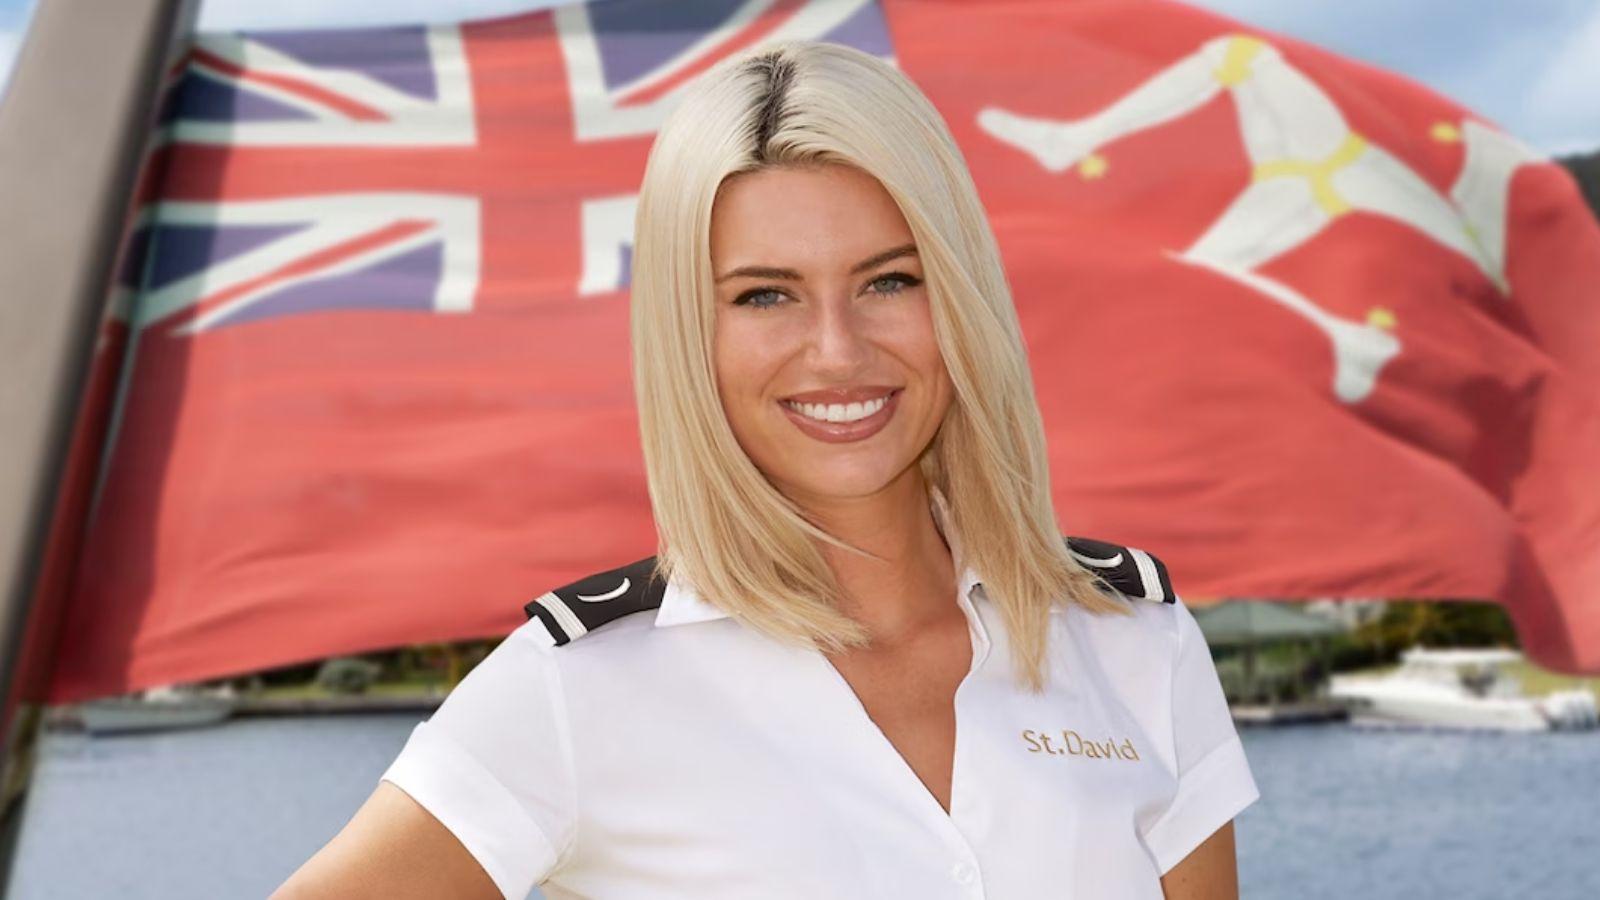 Camille from Below Deck